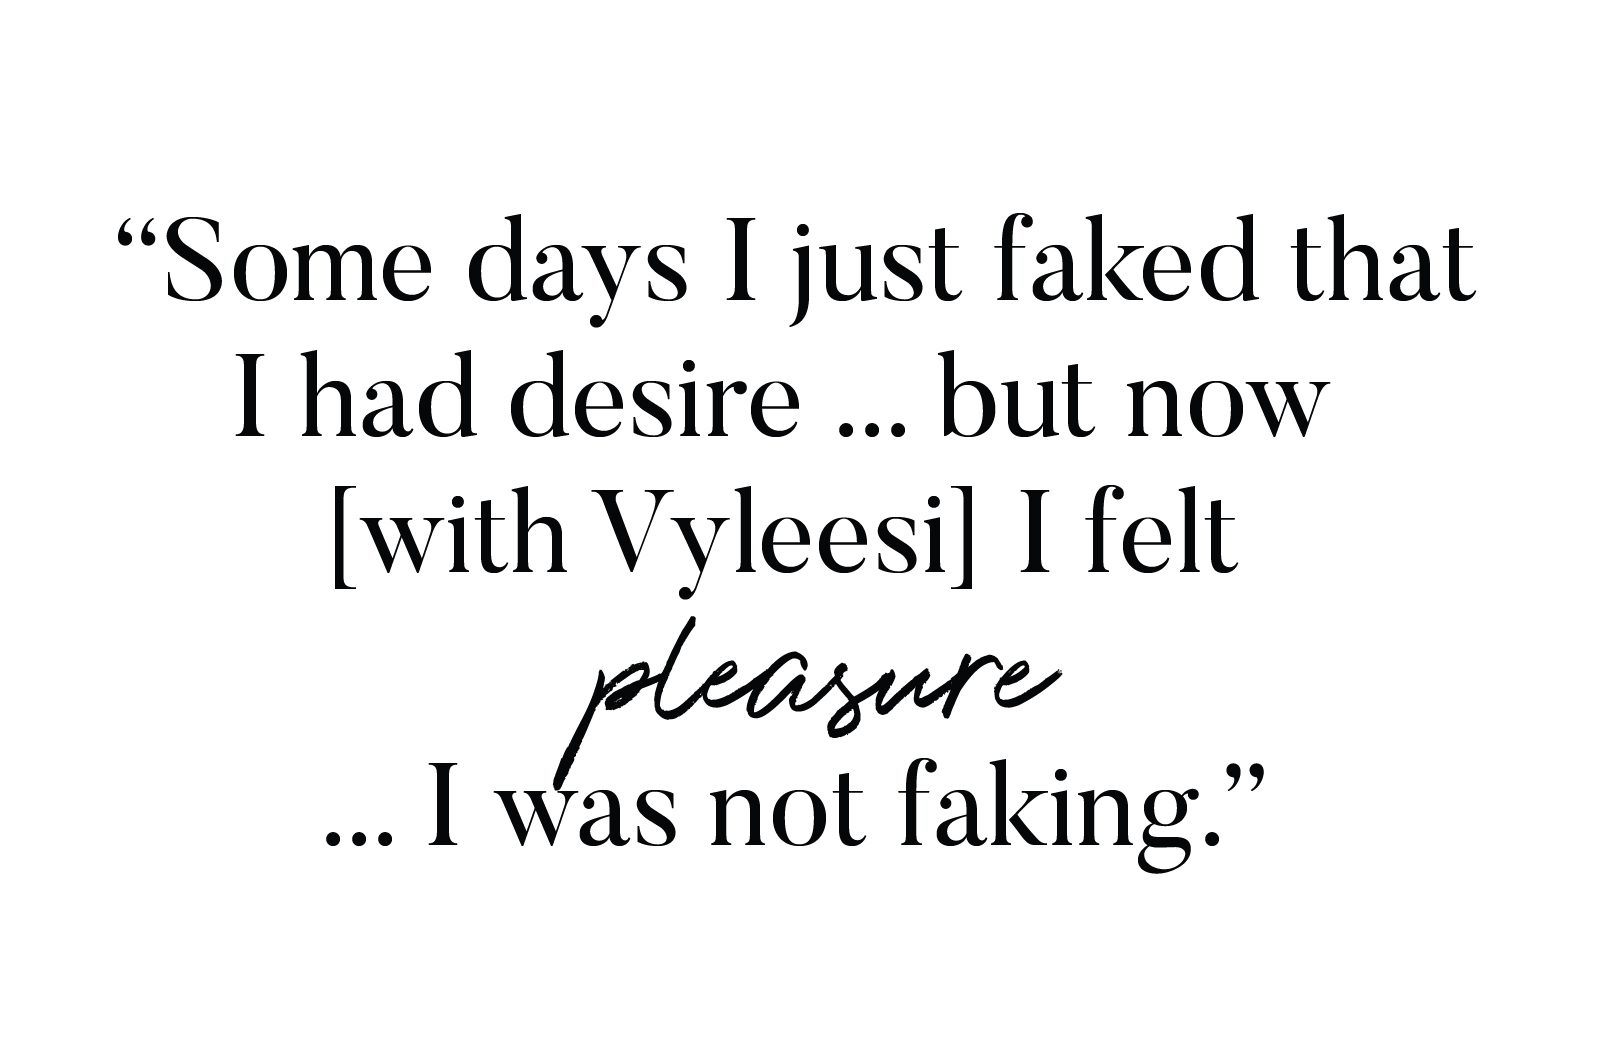 "Some days I just faked that I had desire... but now with Vyleesi I felt pleasure... I was not faking."